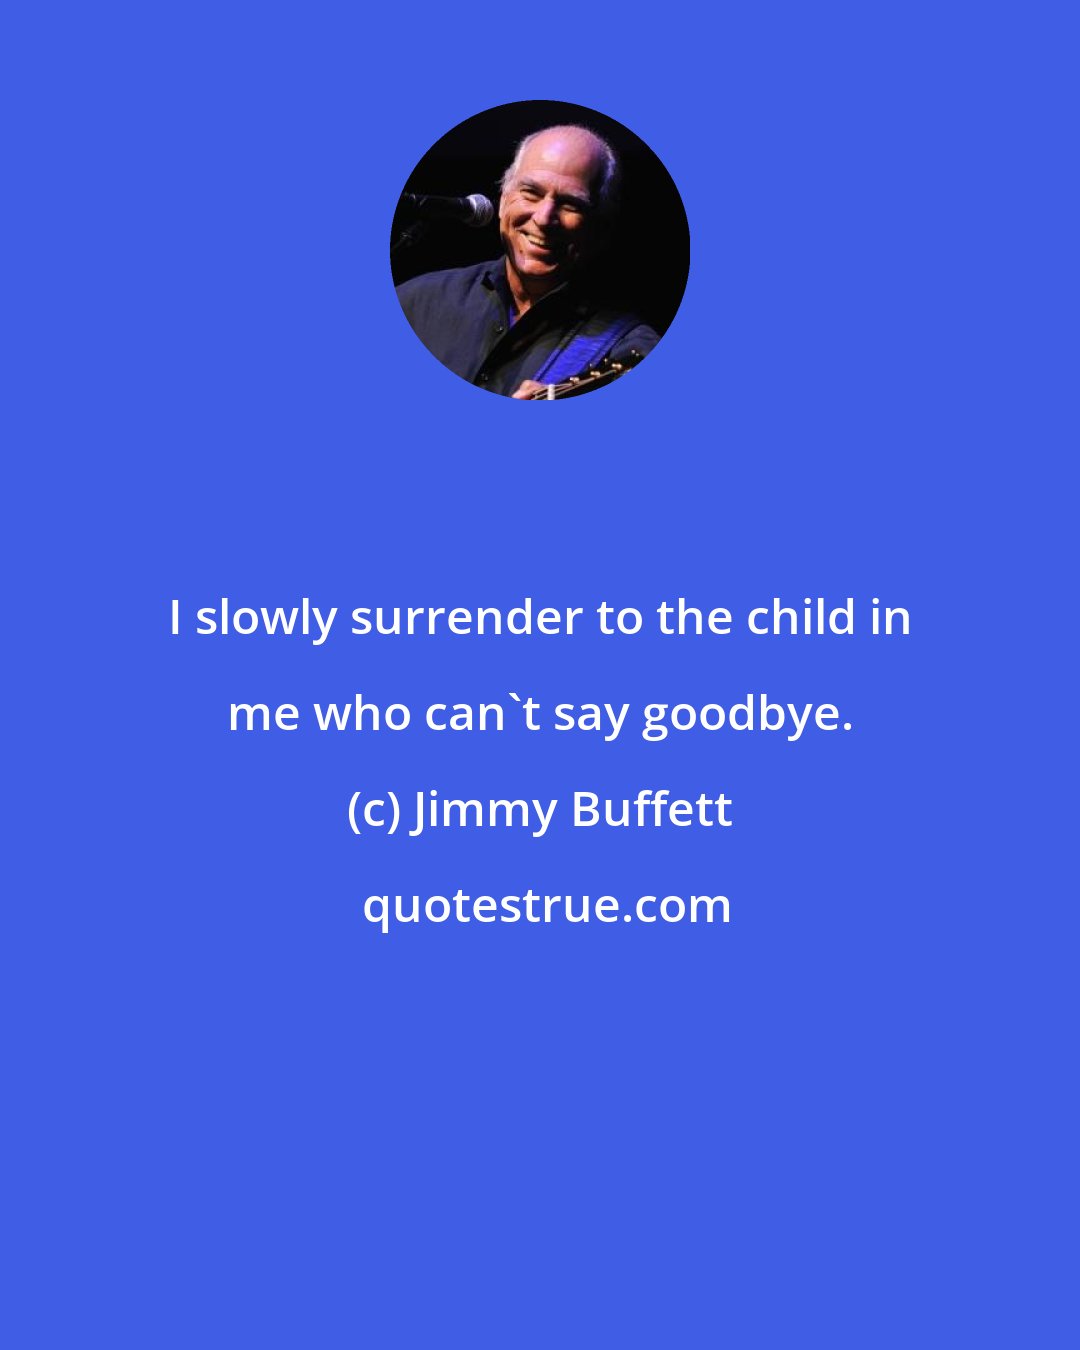 Jimmy Buffett: I slowly surrender to the child in me who can't say goodbye.